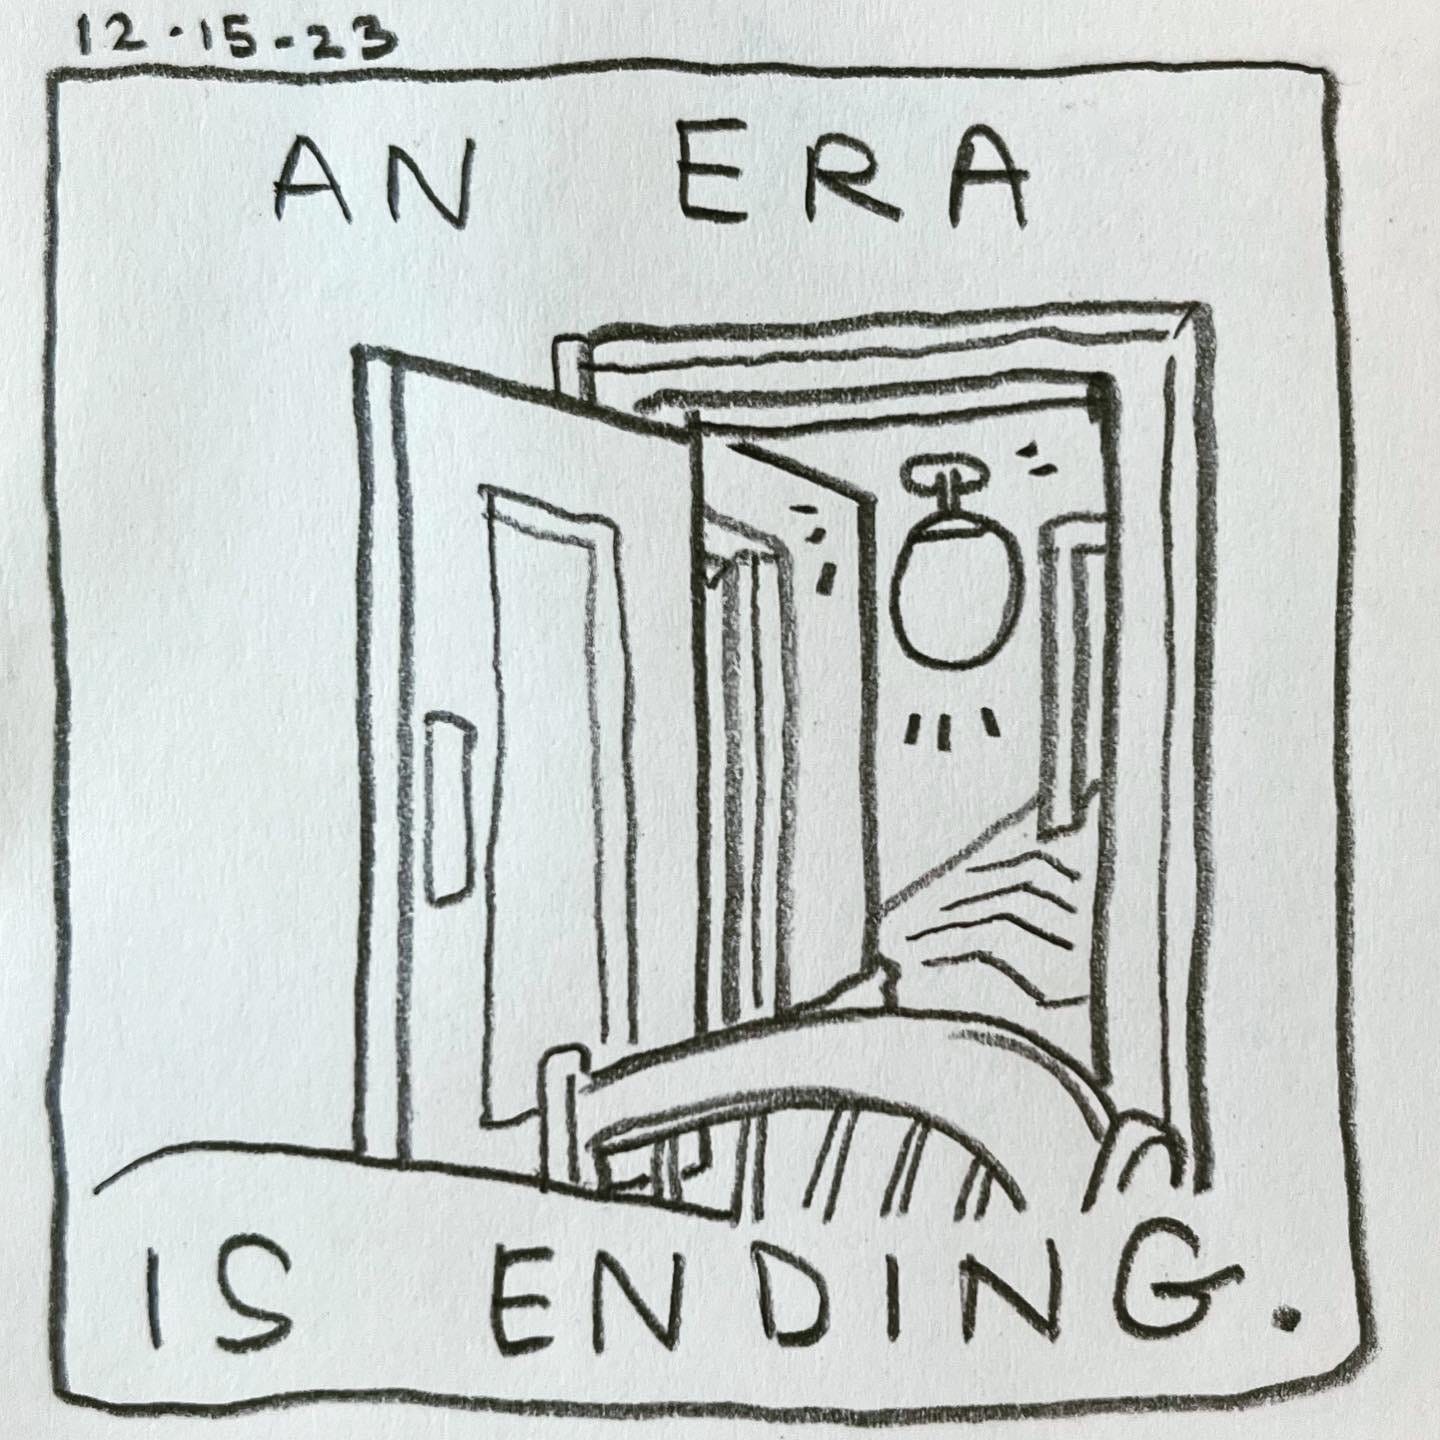 Panel 1: an era is ending. Image: An architectural drawing looking past a dining chair in the foreground, through a doorway into a room with chevron flooring and a large spherical light hanging from the ceiling, through another doorway behind that.